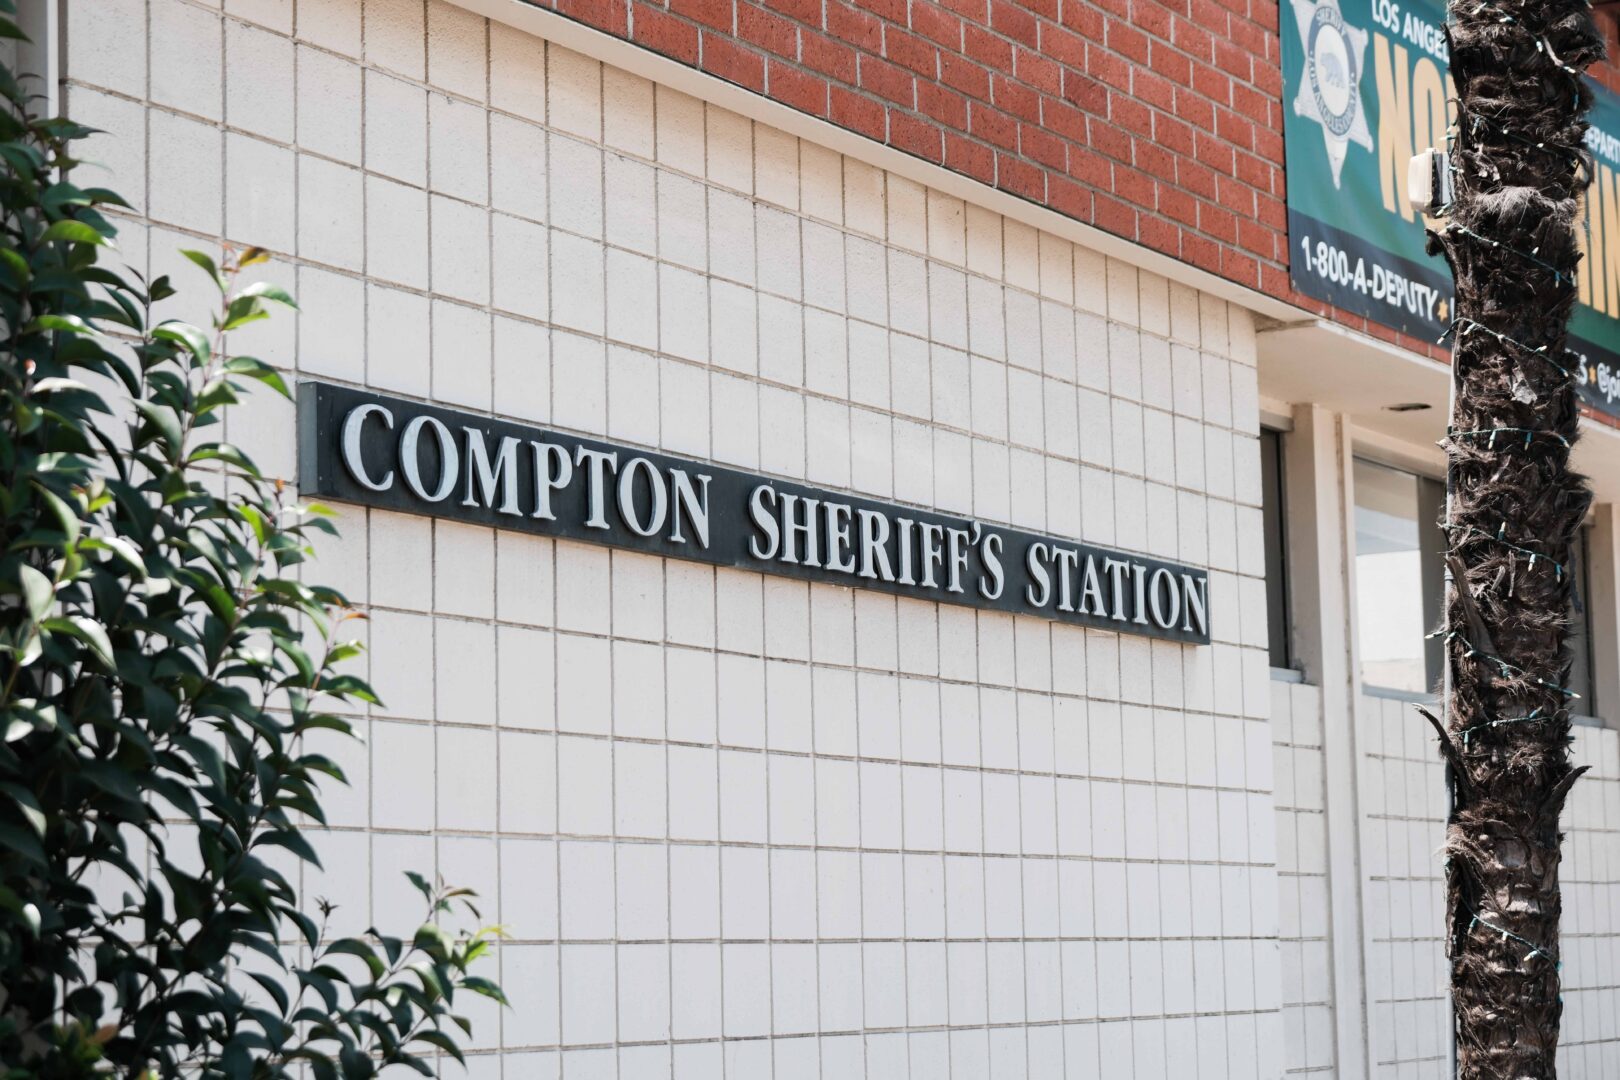 A sign outside the Los Angeles Sheriff's Department Compton station that reads "Compton Sheriff's Station"